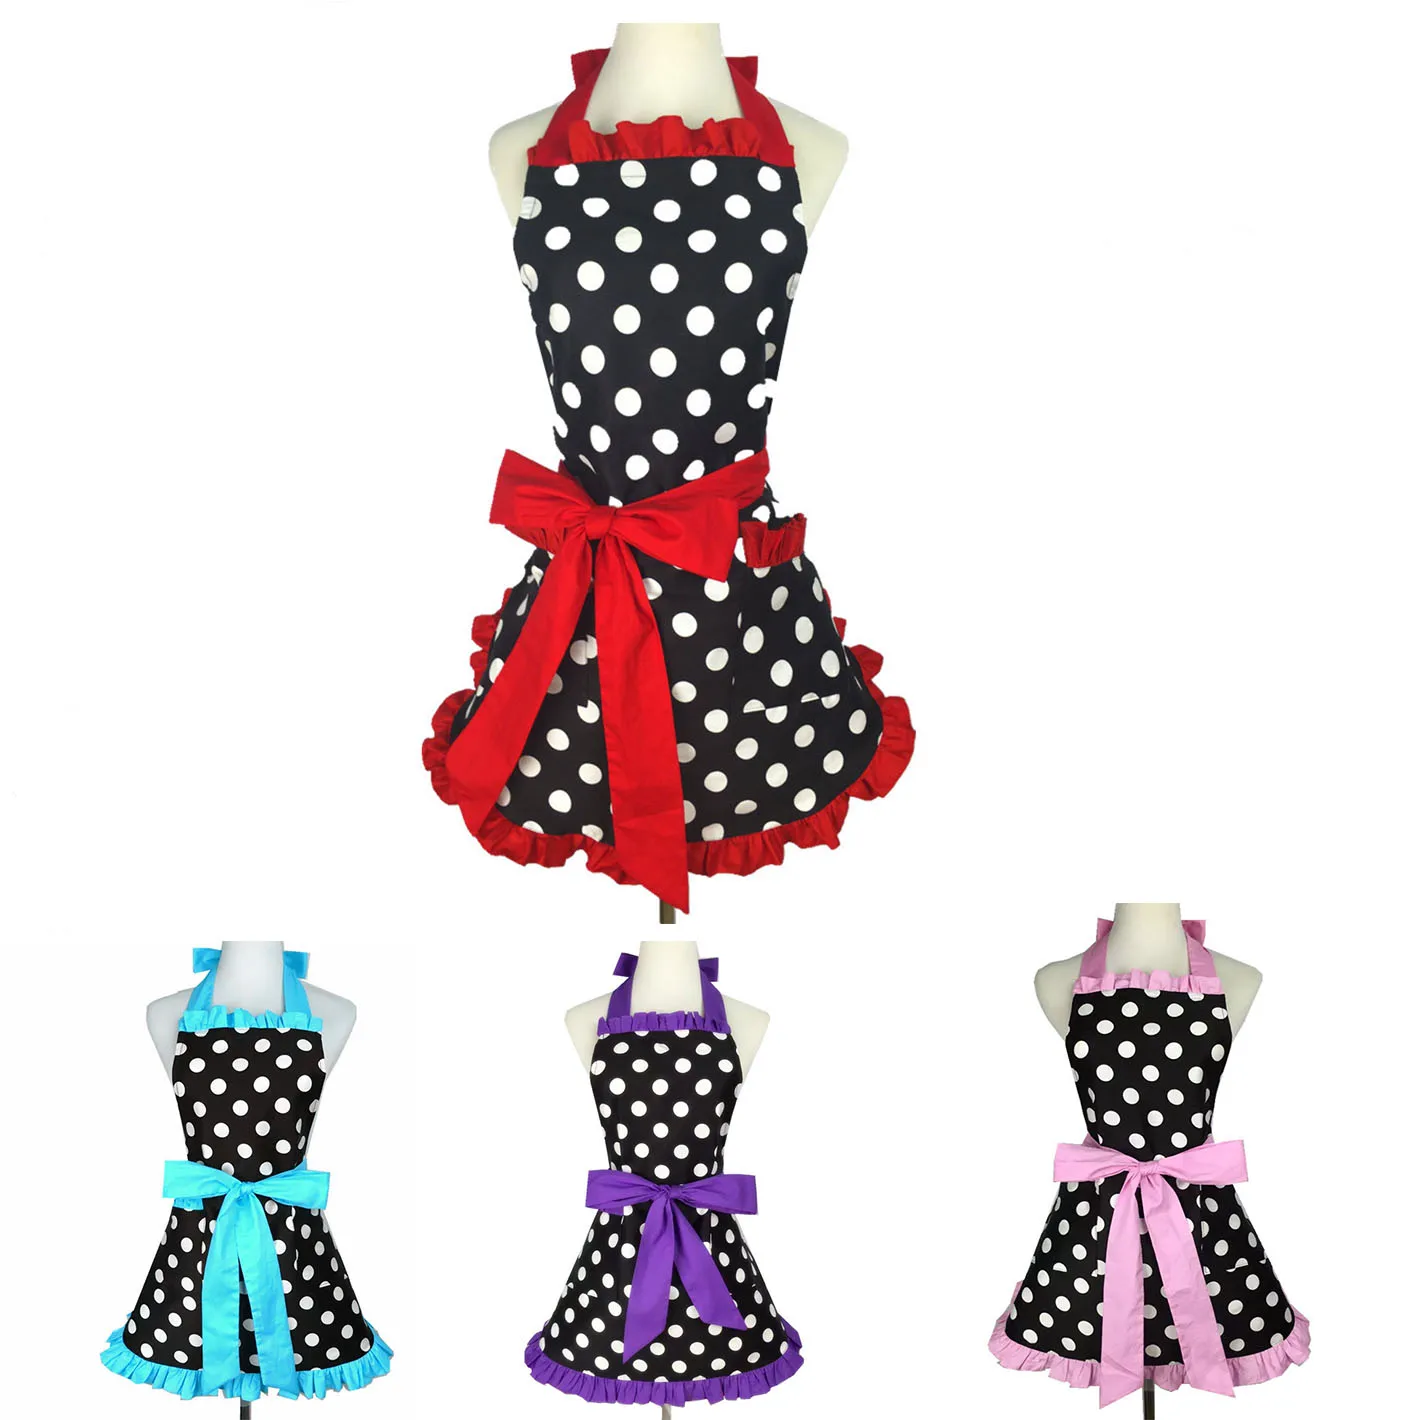 

Lovely Apron For Women Kitchen Cooking Work Clothes Polka Dot Princess Bowknot Waterproof Oilproof